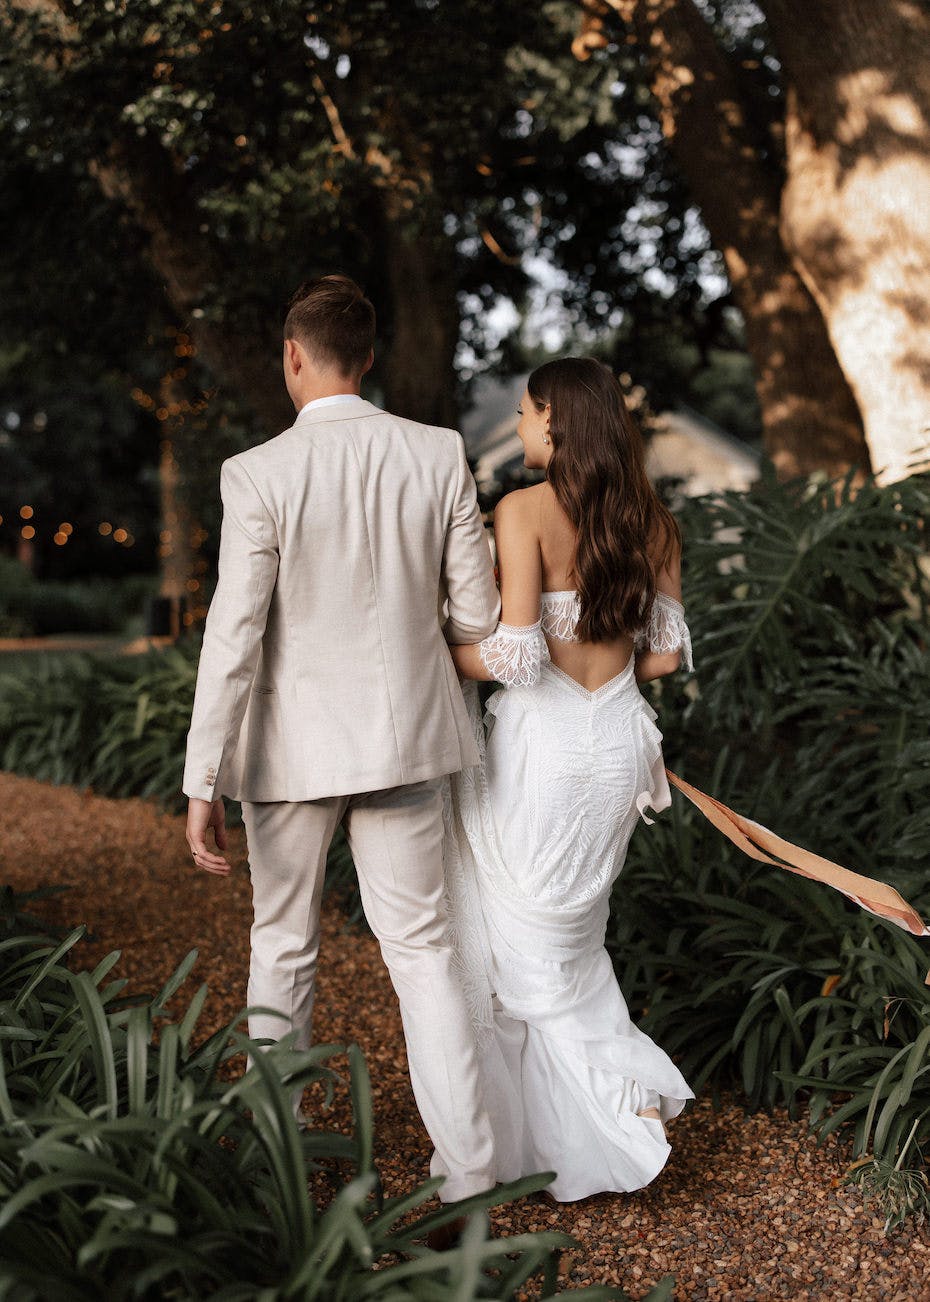 A bride and groom walk hand in hand down a garden path. The bride wears a white, off-the-shoulder wedding dress with lace details and a train, and the groom is dressed in a light beige suit. They are surrounded by lush greenery and trees, with lights glowing in the background.